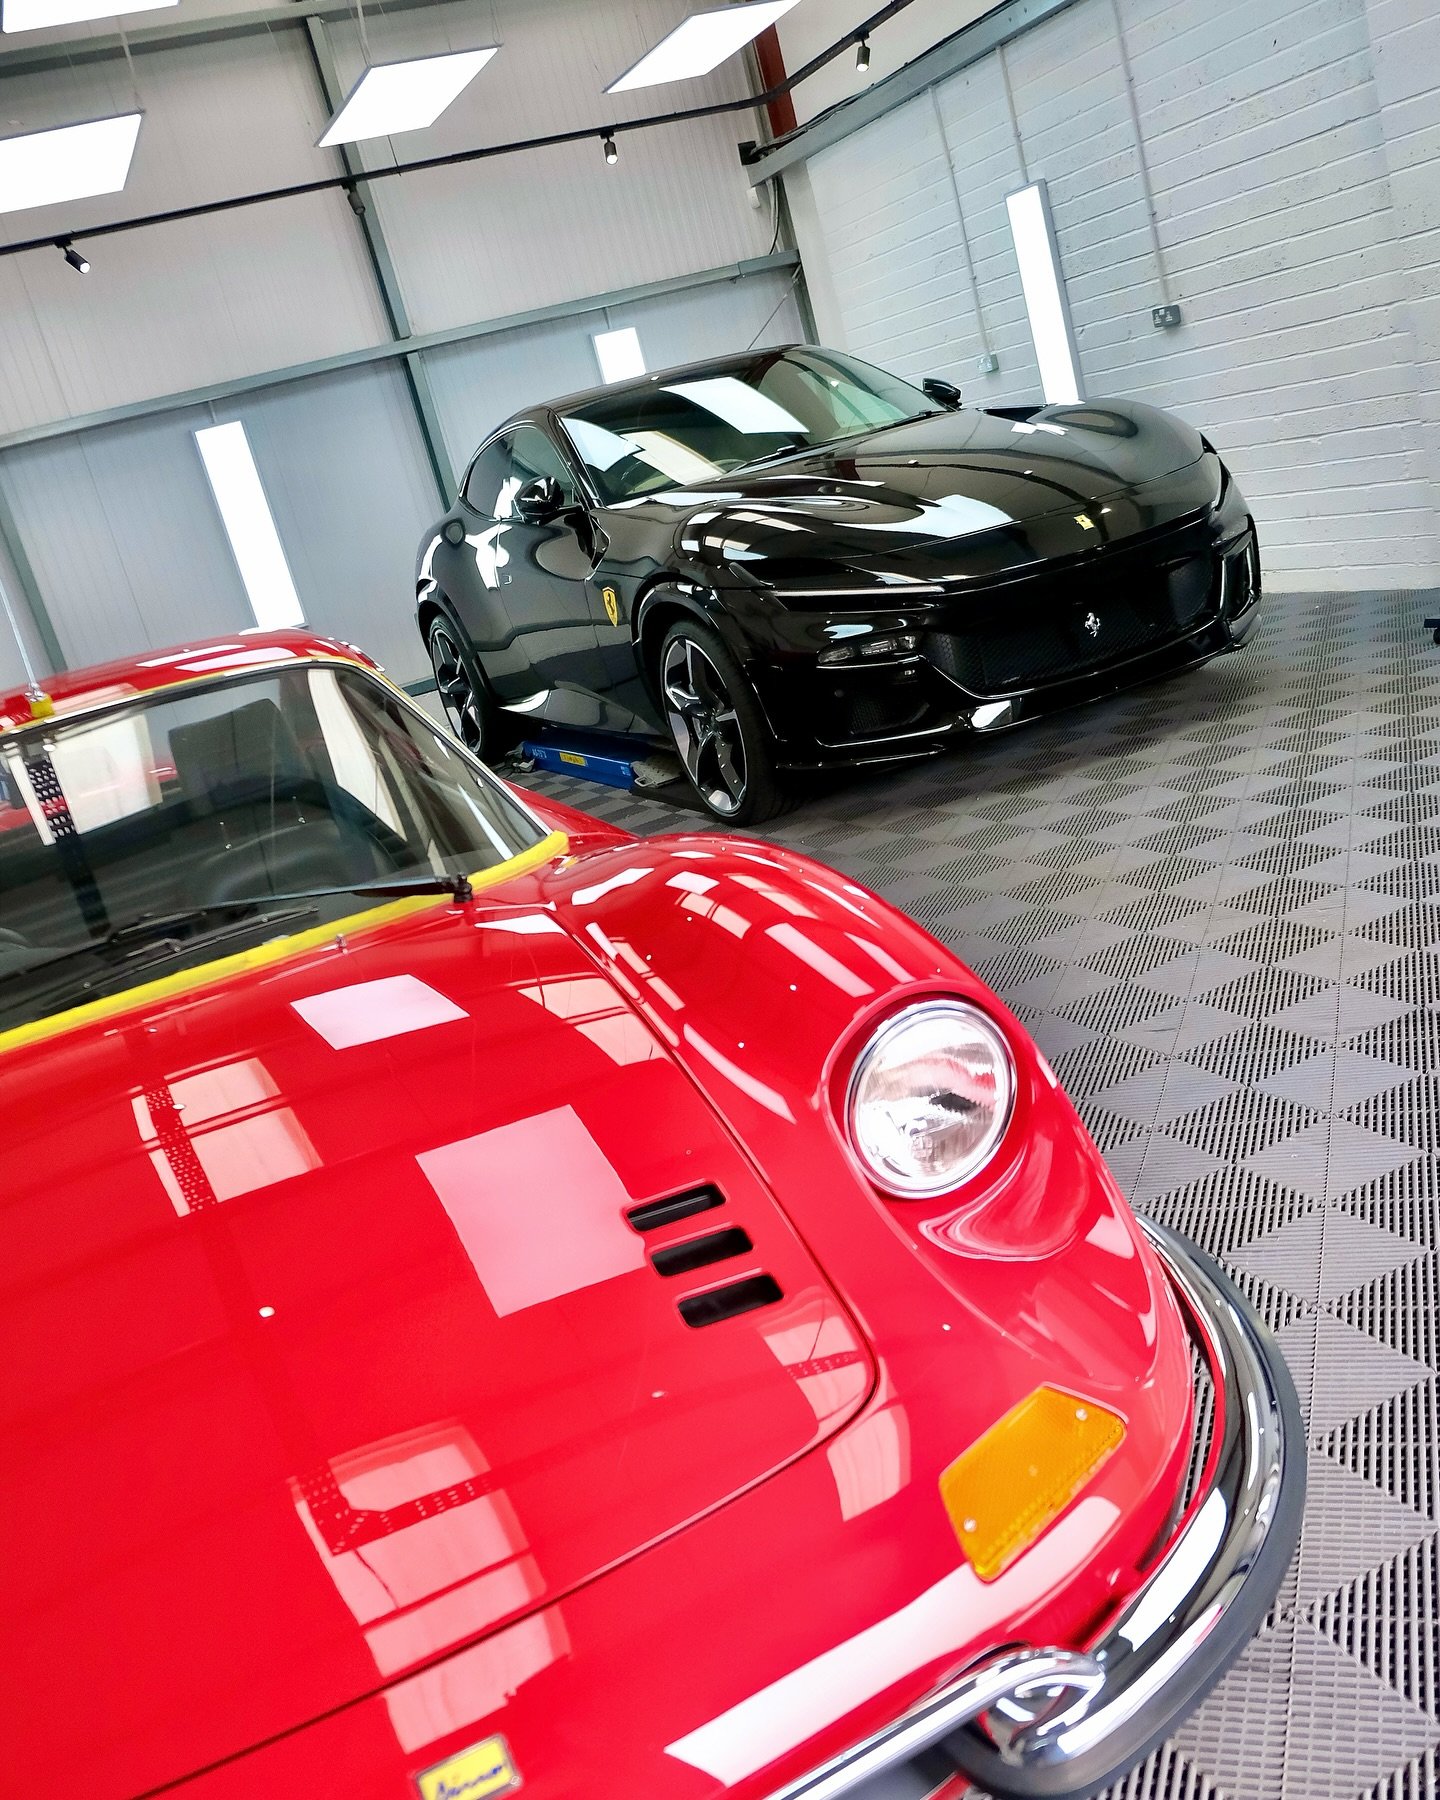 It&rsquo;s #Ferrarifriday! Two very special Ferraris here for some DD treatment this week, more to follow! 

#ferrari #ferrarifriday #ferraridino #ferraridinogt #dino #dinogt #rossocorsa #ferraripurosangue #purosangue #ferraripurosanguesuv #daytonabl